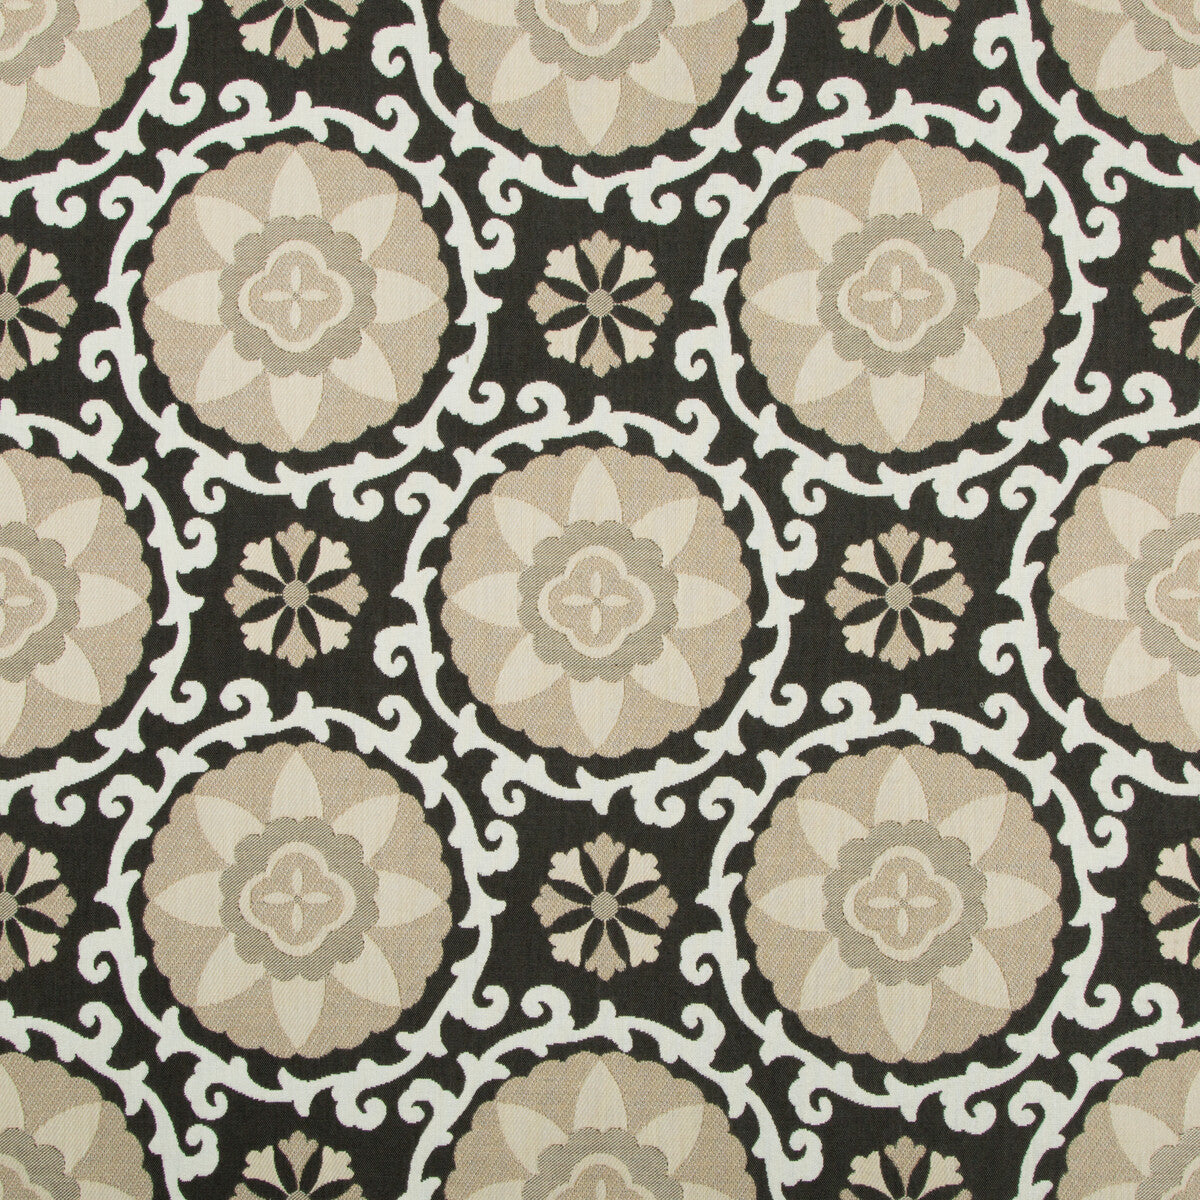 Exotic Suzani fabric in coal color - pattern 31969.816.0 - by Kravet Design in the Oceania Indoor Outdoor collection